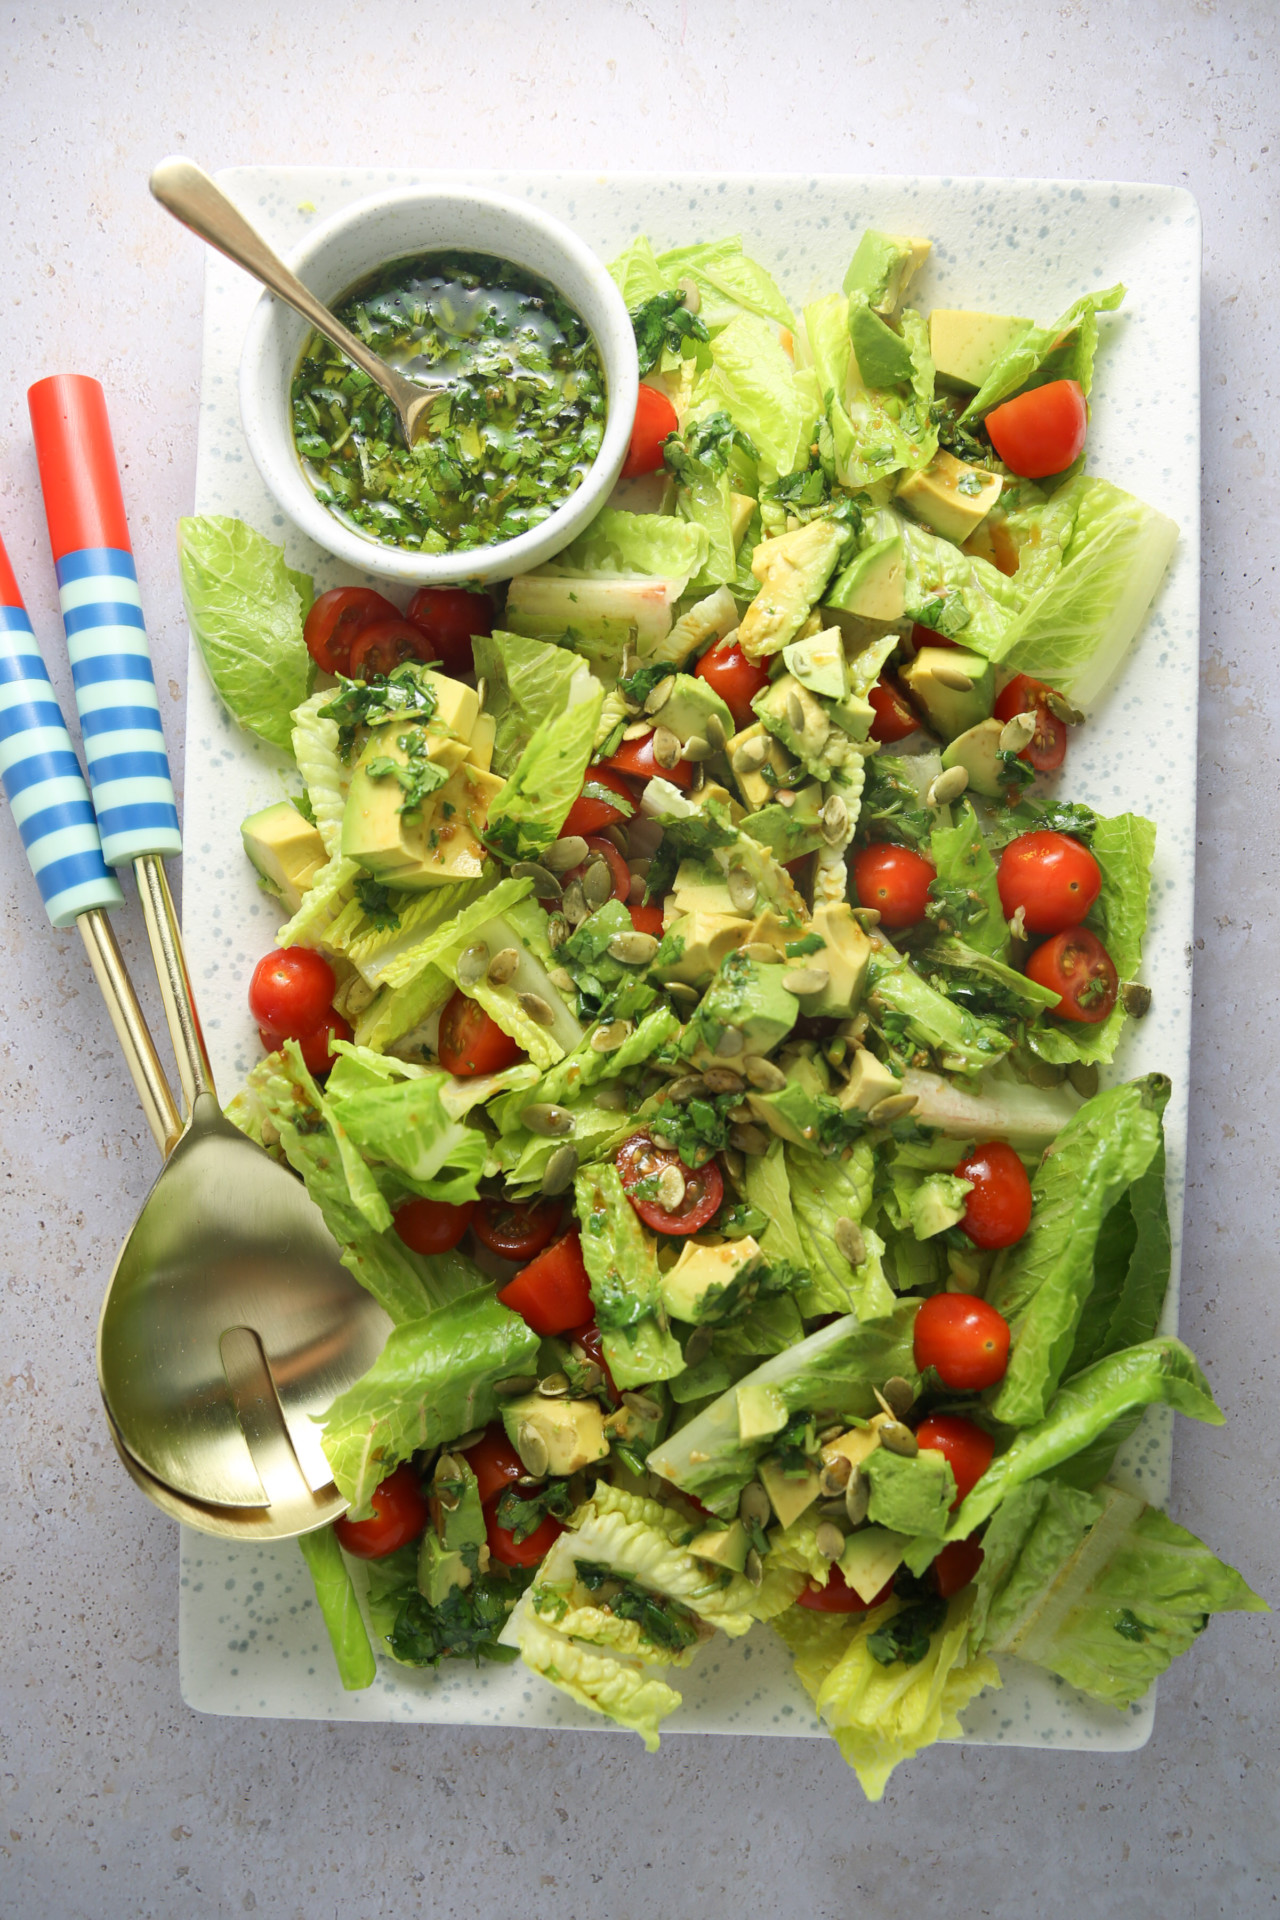 A vibrant salad is served on a rectangular white plate. The salad features chopped romaine lettuce, halved cherry tomatoes, and avocado pieces, garnished with seeds. A small bowl of cilantro dressing sits at the top left with two blue and white striped-handled spoons placed beside it.